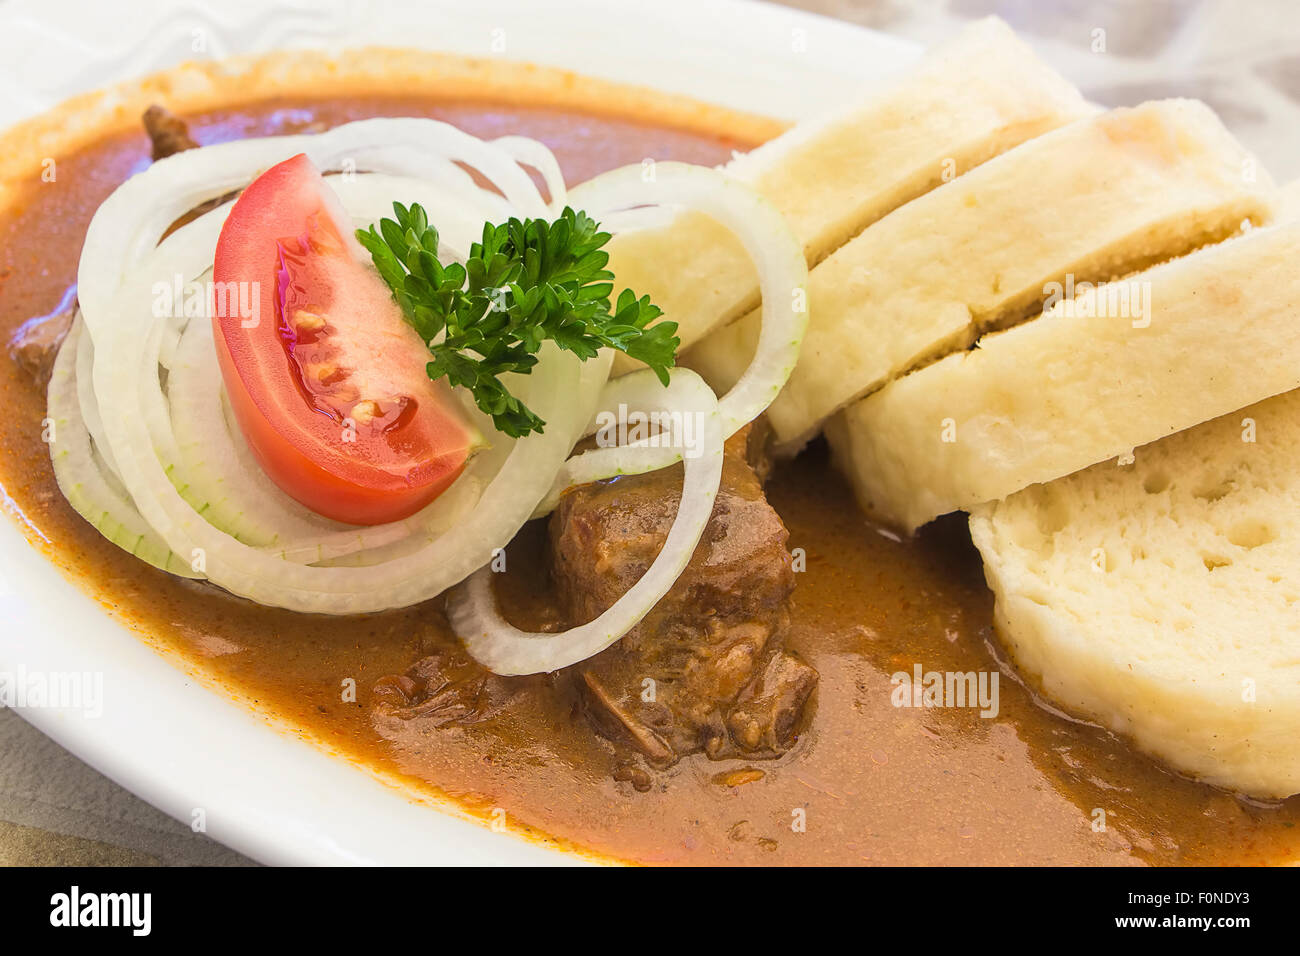 Goulash with onion and dumplings, typical Czech or German cuisine or dish. Stock Photo